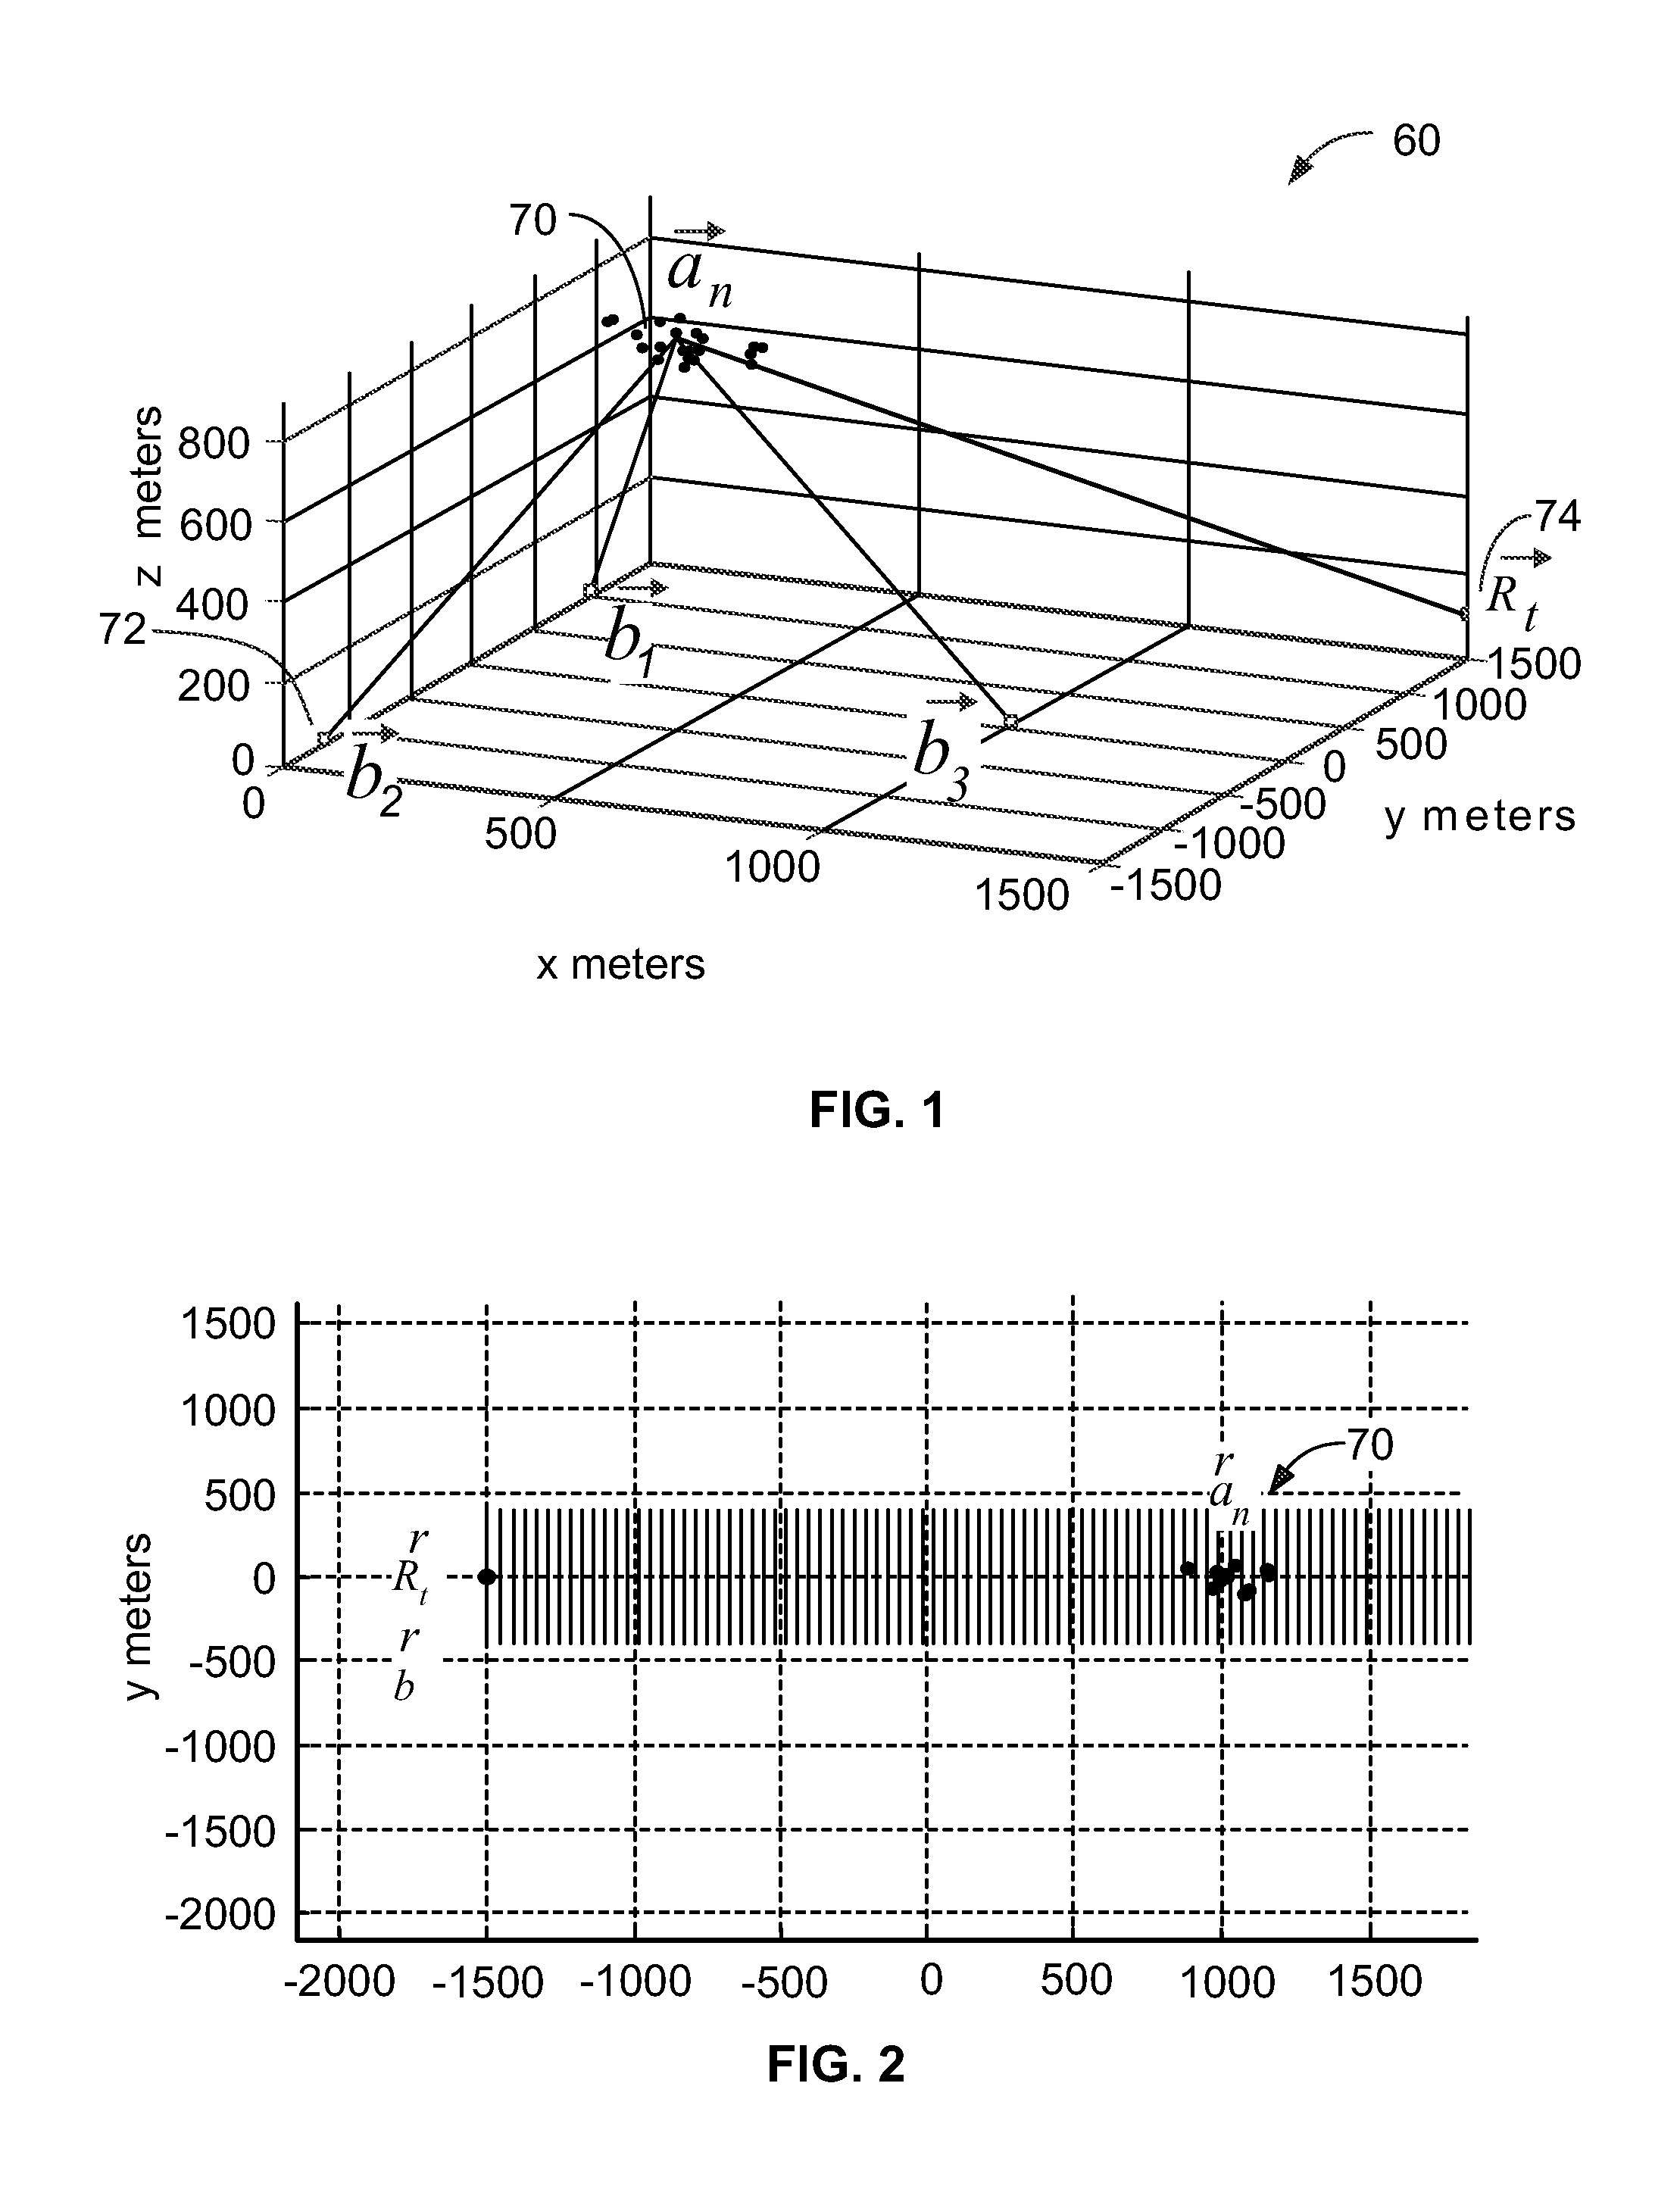 System and method to form coherent wavefronts for arbitrarily distributed phased arrays